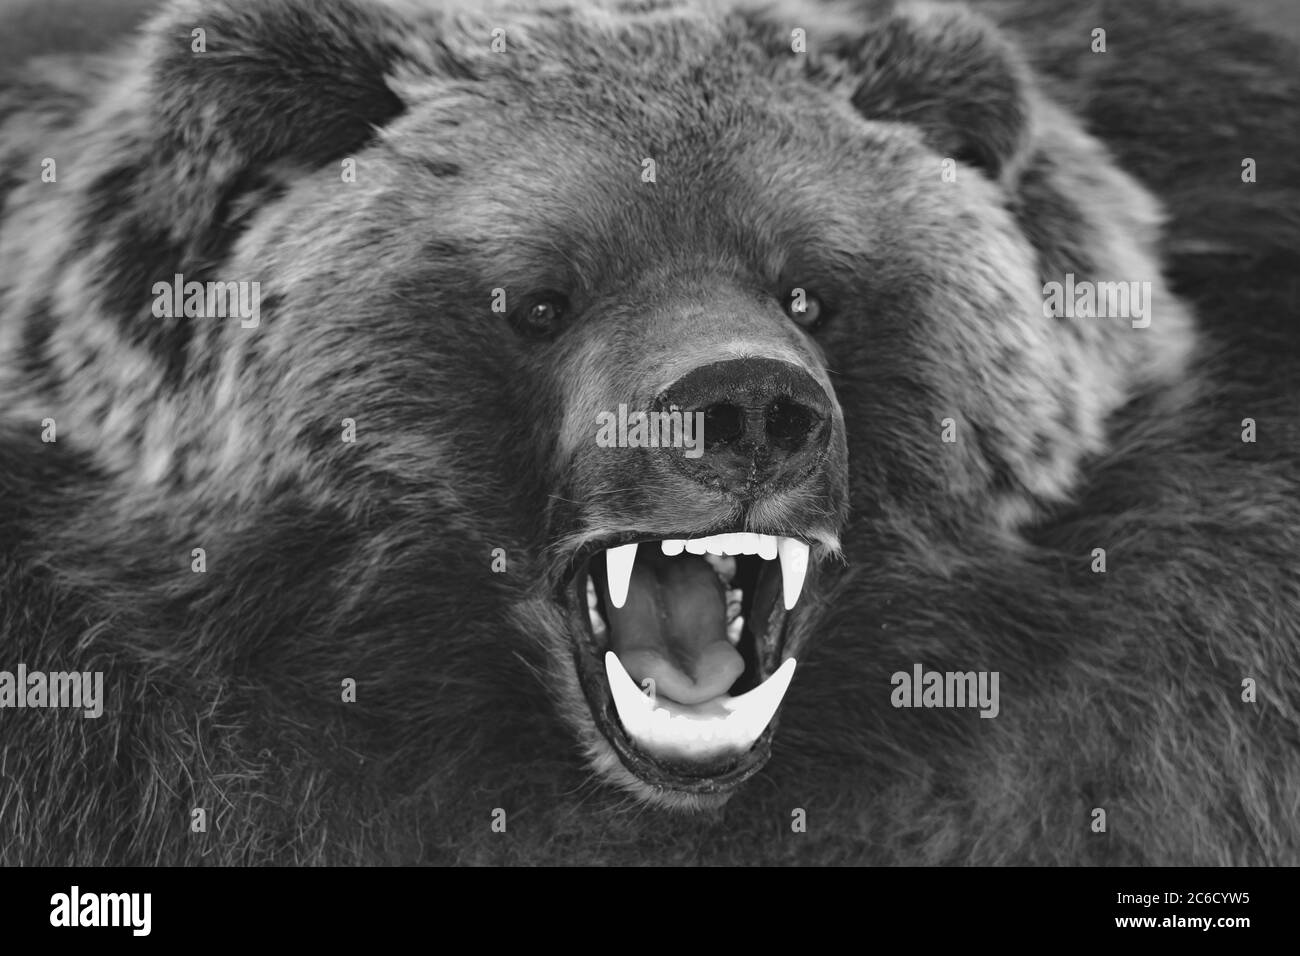 stuffed brown bear with open mouth close up Stock Photo